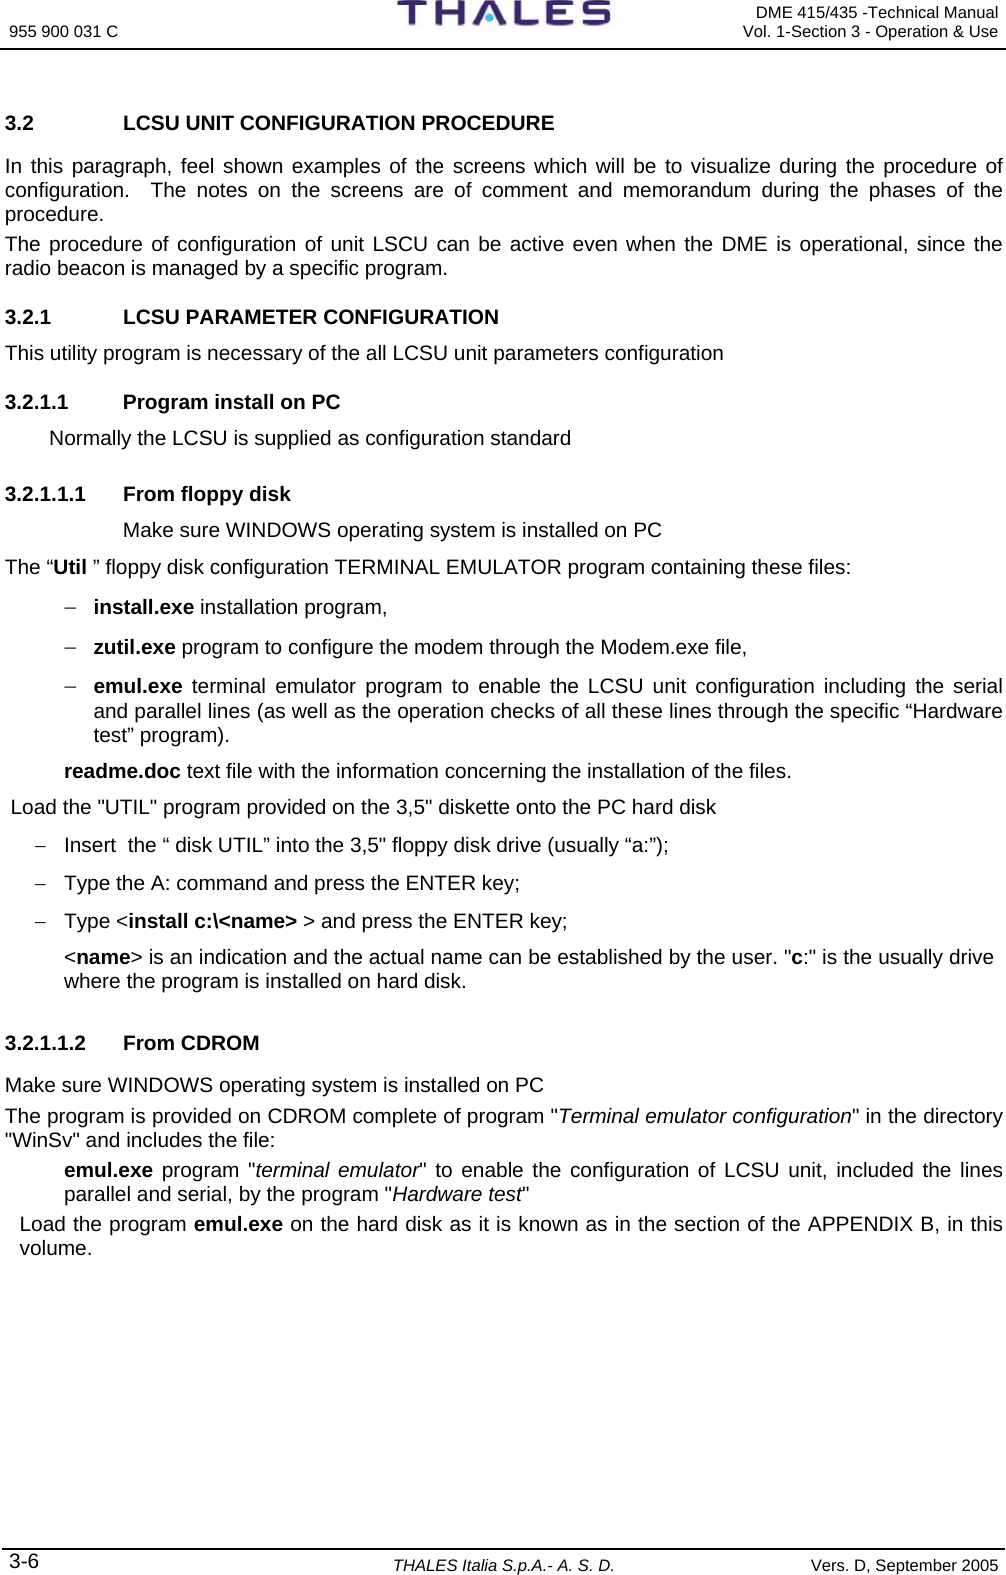 955 900 031 C   DME 415/435 -Technical Manual Vol. 1-Section 3 - Operation &amp; Use 3-6 THALES Italia S.p.A.- A. S. D. Vers. D, September 2005 3.2  LCSU UNIT CONFIGURATION PROCEDURE In this paragraph, feel shown examples of the screens which will be to visualize during the procedure of configuration.  The notes on the screens are of comment and memorandum during the phases of the procedure.   The procedure of configuration of unit LSCU can be active even when the DME is operational, since the radio beacon is managed by a specific program. 3.2.1  LCSU PARAMETER CONFIGURATION  This utility program is necessary of the all LCSU unit parameters configuration  3.2.1.1  Program install on PC Normally the LCSU is supplied as configuration standard   3.2.1.1.1 From floppy disk Make sure WINDOWS operating system is installed on PC The “Util ” floppy disk configuration TERMINAL EMULATOR program containing these files: − install.exe installation program, − zutil.exe program to configure the modem through the Modem.exe file, − emul.exe terminal emulator program to enable the LCSU unit configuration including the serial and parallel lines (as well as the operation checks of all these lines through the specific “Hardware test” program). readme.doc text file with the information concerning the installation of the files.  Load the &quot;UTIL&quot; program provided on the 3,5&quot; diskette onto the PC hard disk −  Insert  the “ disk UTIL” into the 3,5&quot; floppy disk drive (usually “a:”); −  Type the A: command and press the ENTER key; − Type &lt;install c:\&lt;name&gt; &gt; and press the ENTER key; &lt;name&gt; is an indication and the actual name can be established by the user. &quot;c:&quot; is the usually drive where the program is installed on hard disk. 3.2.1.1.2  From CDROM  Make sure WINDOWS operating system is installed on PC  The program is provided on CDROM complete of program &quot;Terminal emulator configuration&quot; in the directory &quot;WinSv&quot; and includes the file: emul.exe program &quot;terminal emulator&quot; to enable the configuration of LCSU unit, included the lines parallel and serial, by the program &quot;Hardware test&quot;  Load the program emul.exe on the hard disk as it is known as in the section of the APPENDIX B, in this volume. 